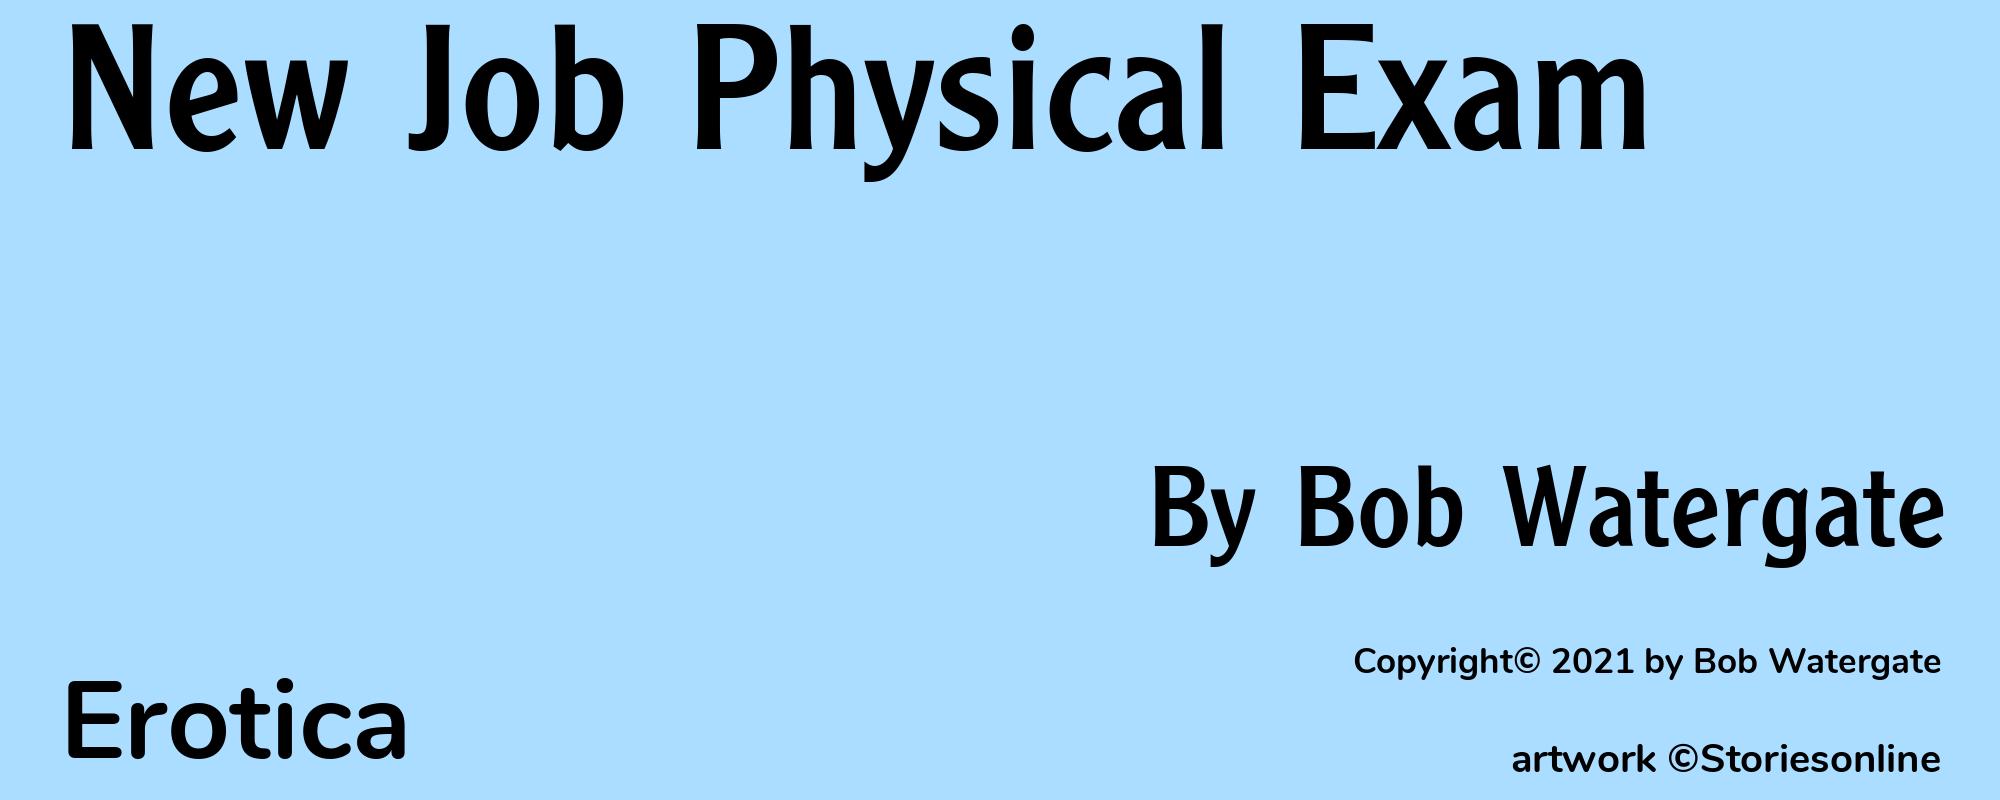 New Job Physical Exam - Cover